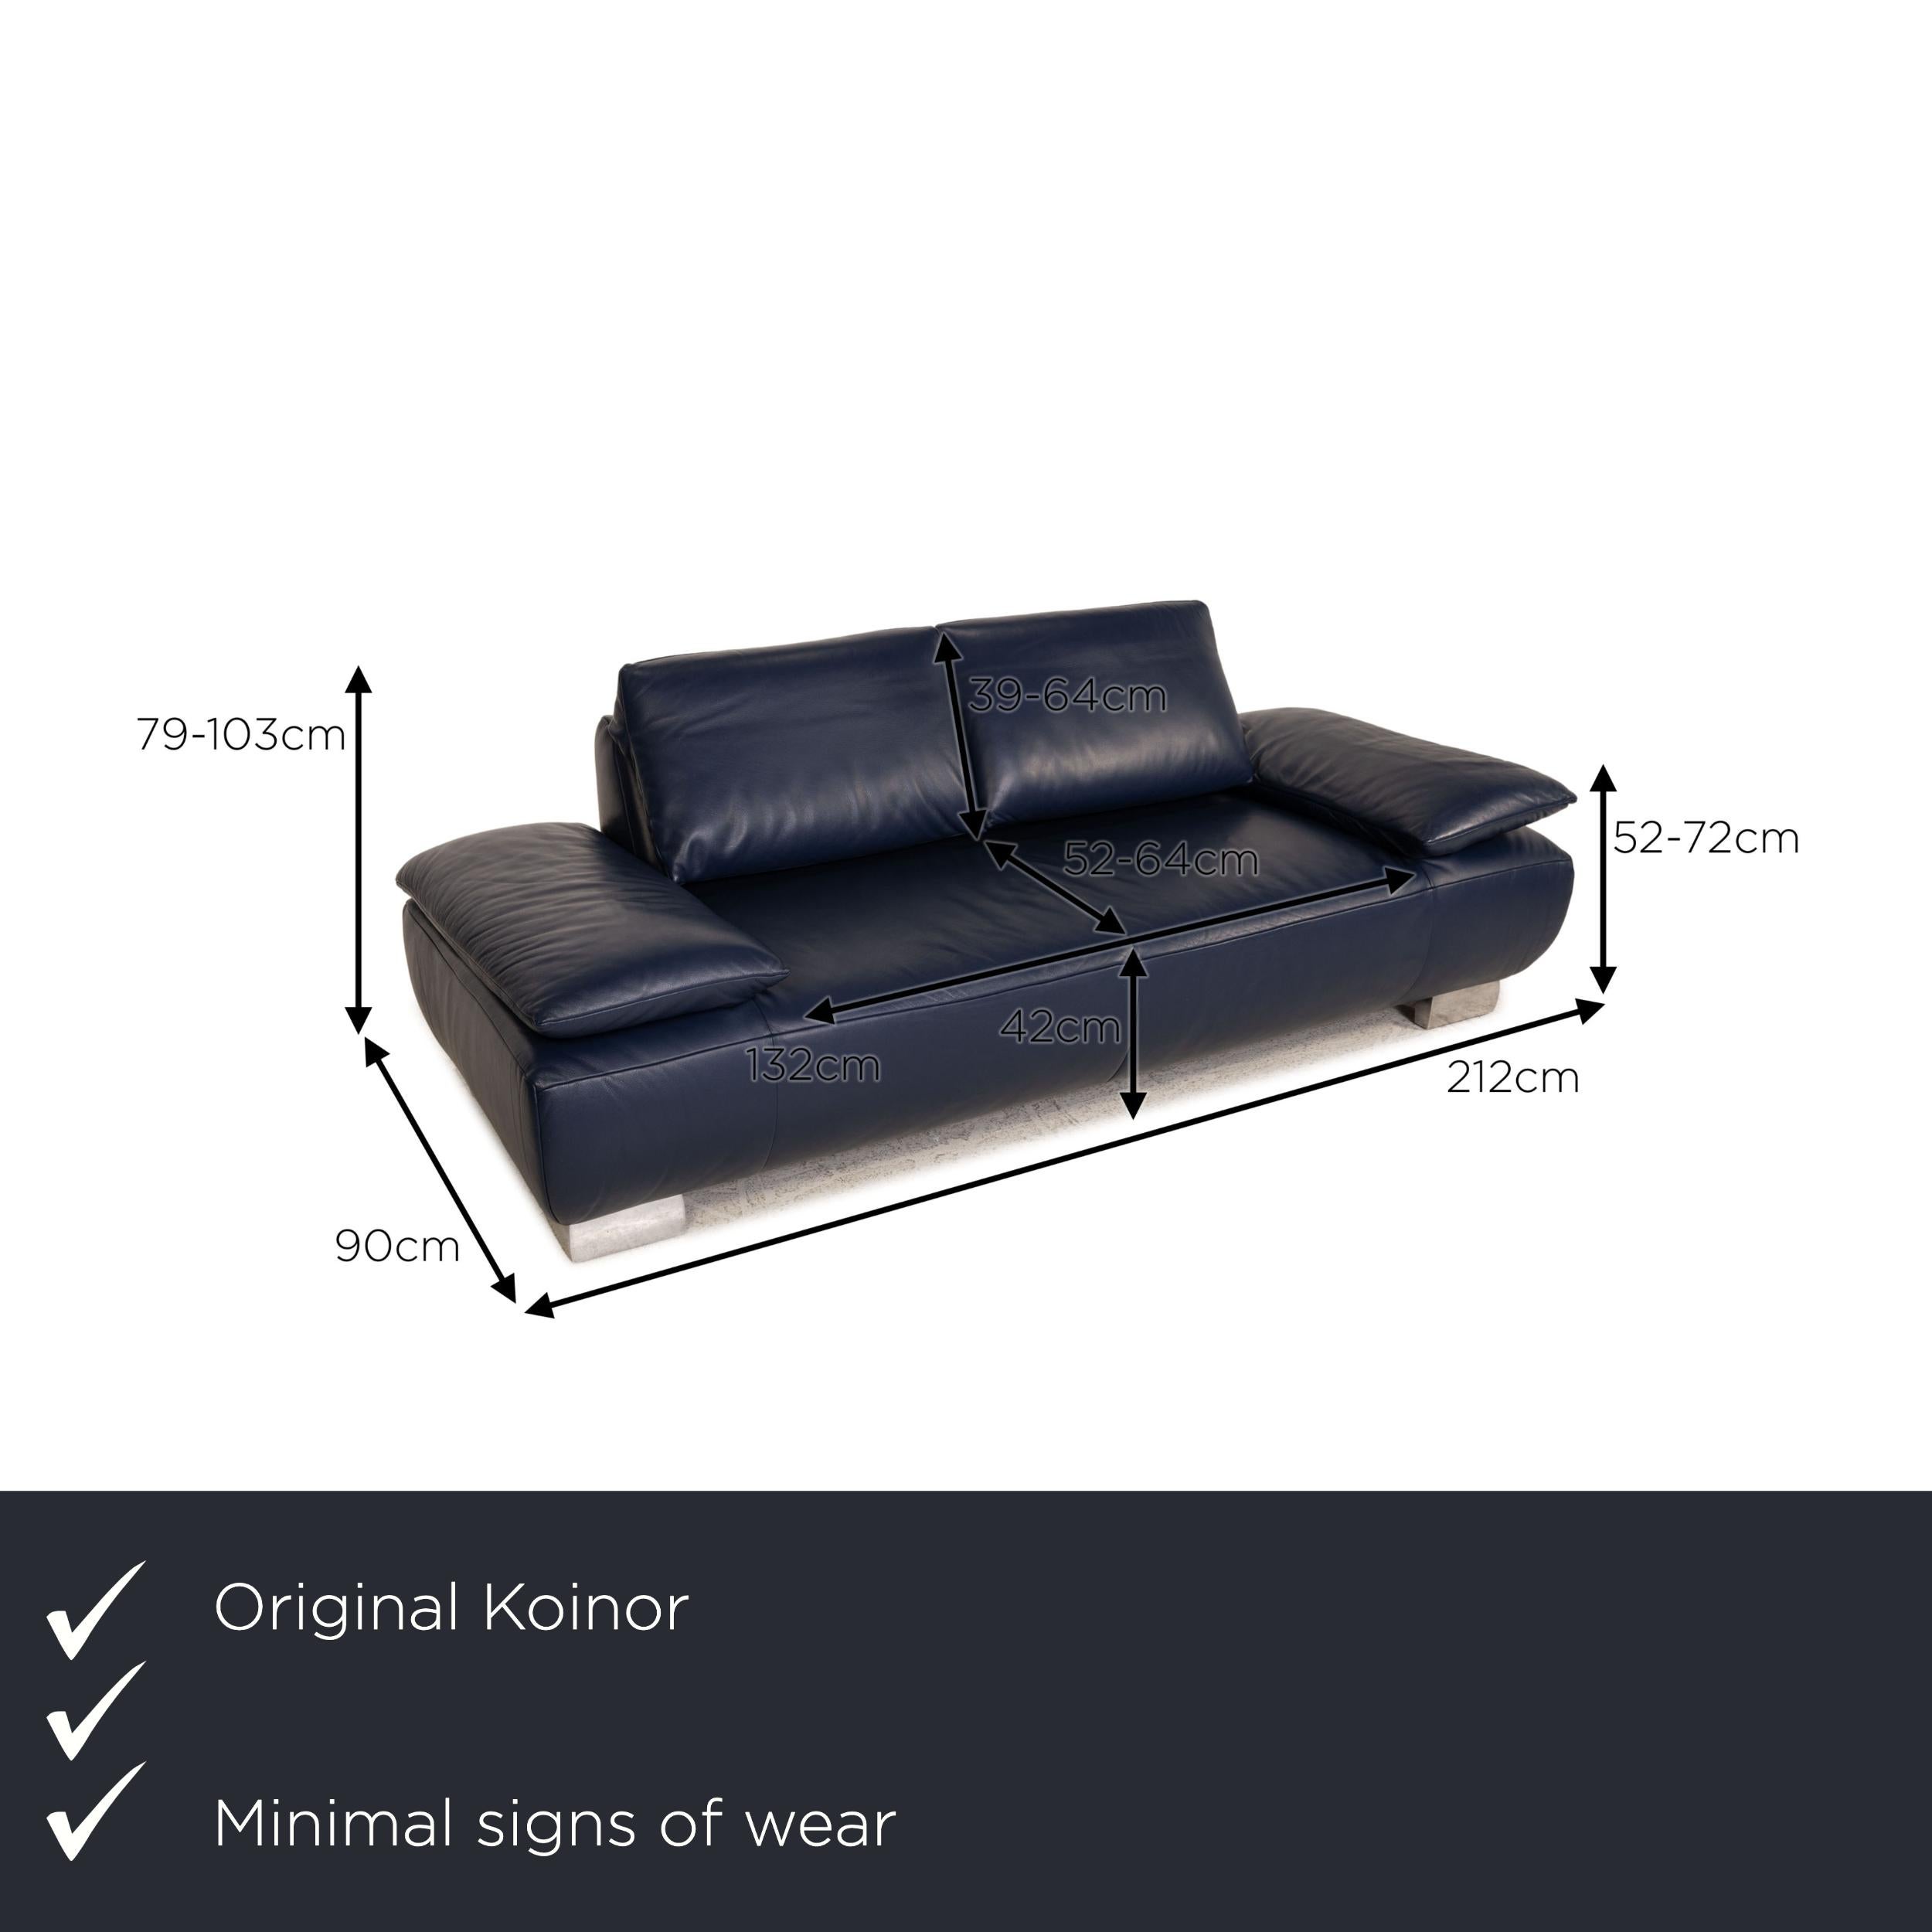 We present to you a Koinor Volare leather sofa blue two seater couch function.

Product measurements in centimeters:

Depth: 90
Width: 212
Height: 79
Seat height: 42
Rest height: 52
Seat depth: 52
Seat width: 132
Back height: 39.

    